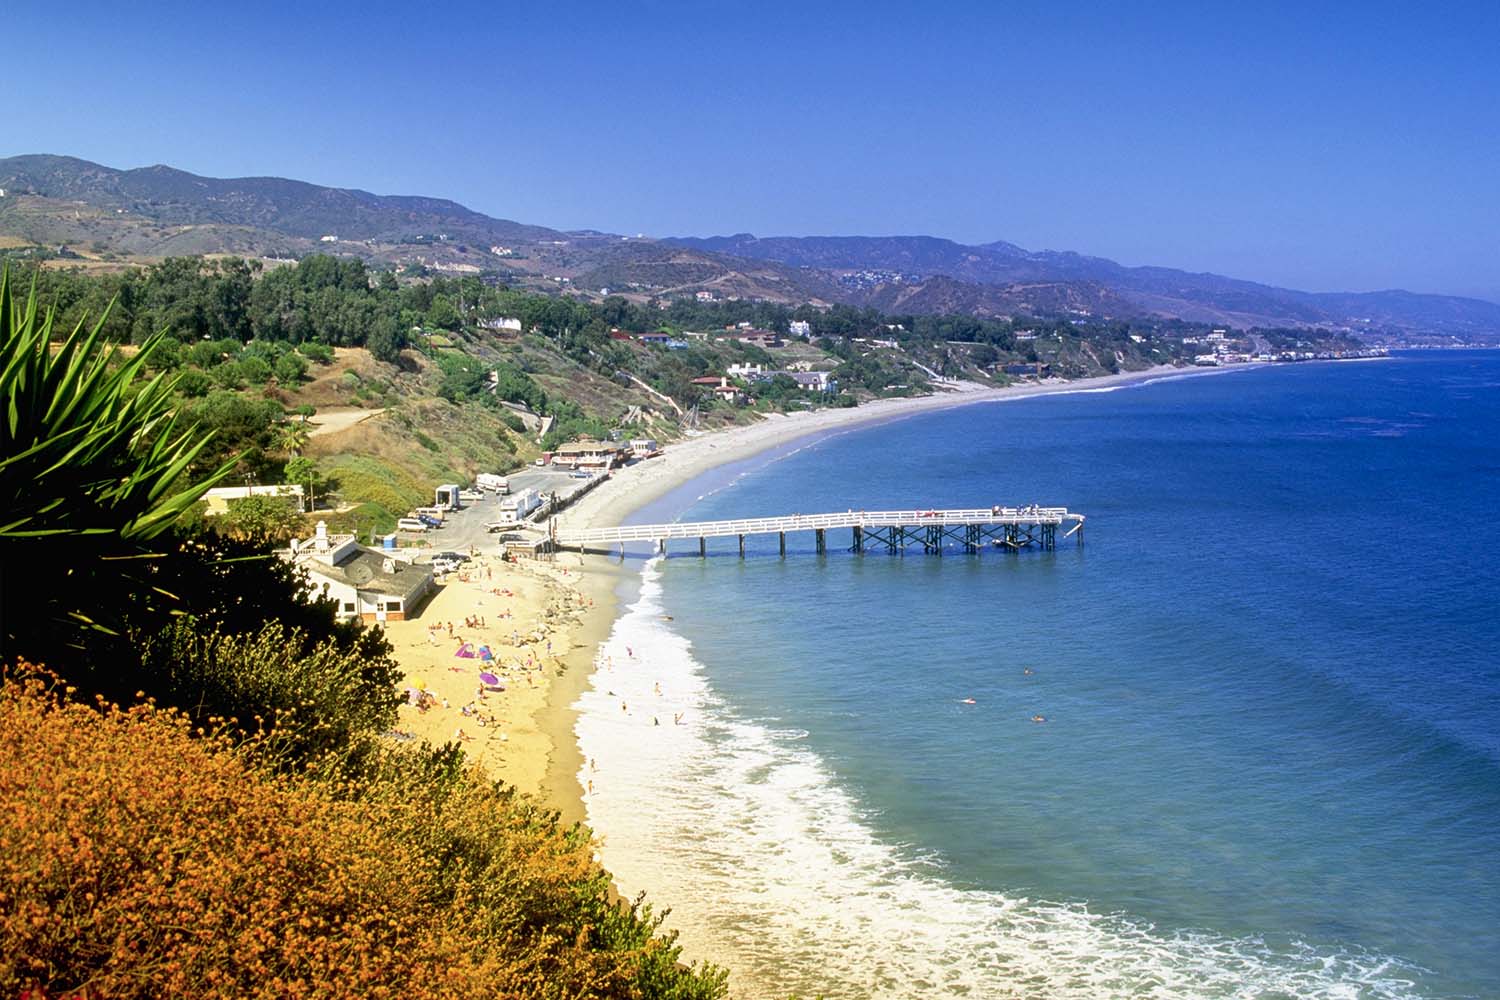 Hidden Malibu Beach Opening to Public After 40 Years pic